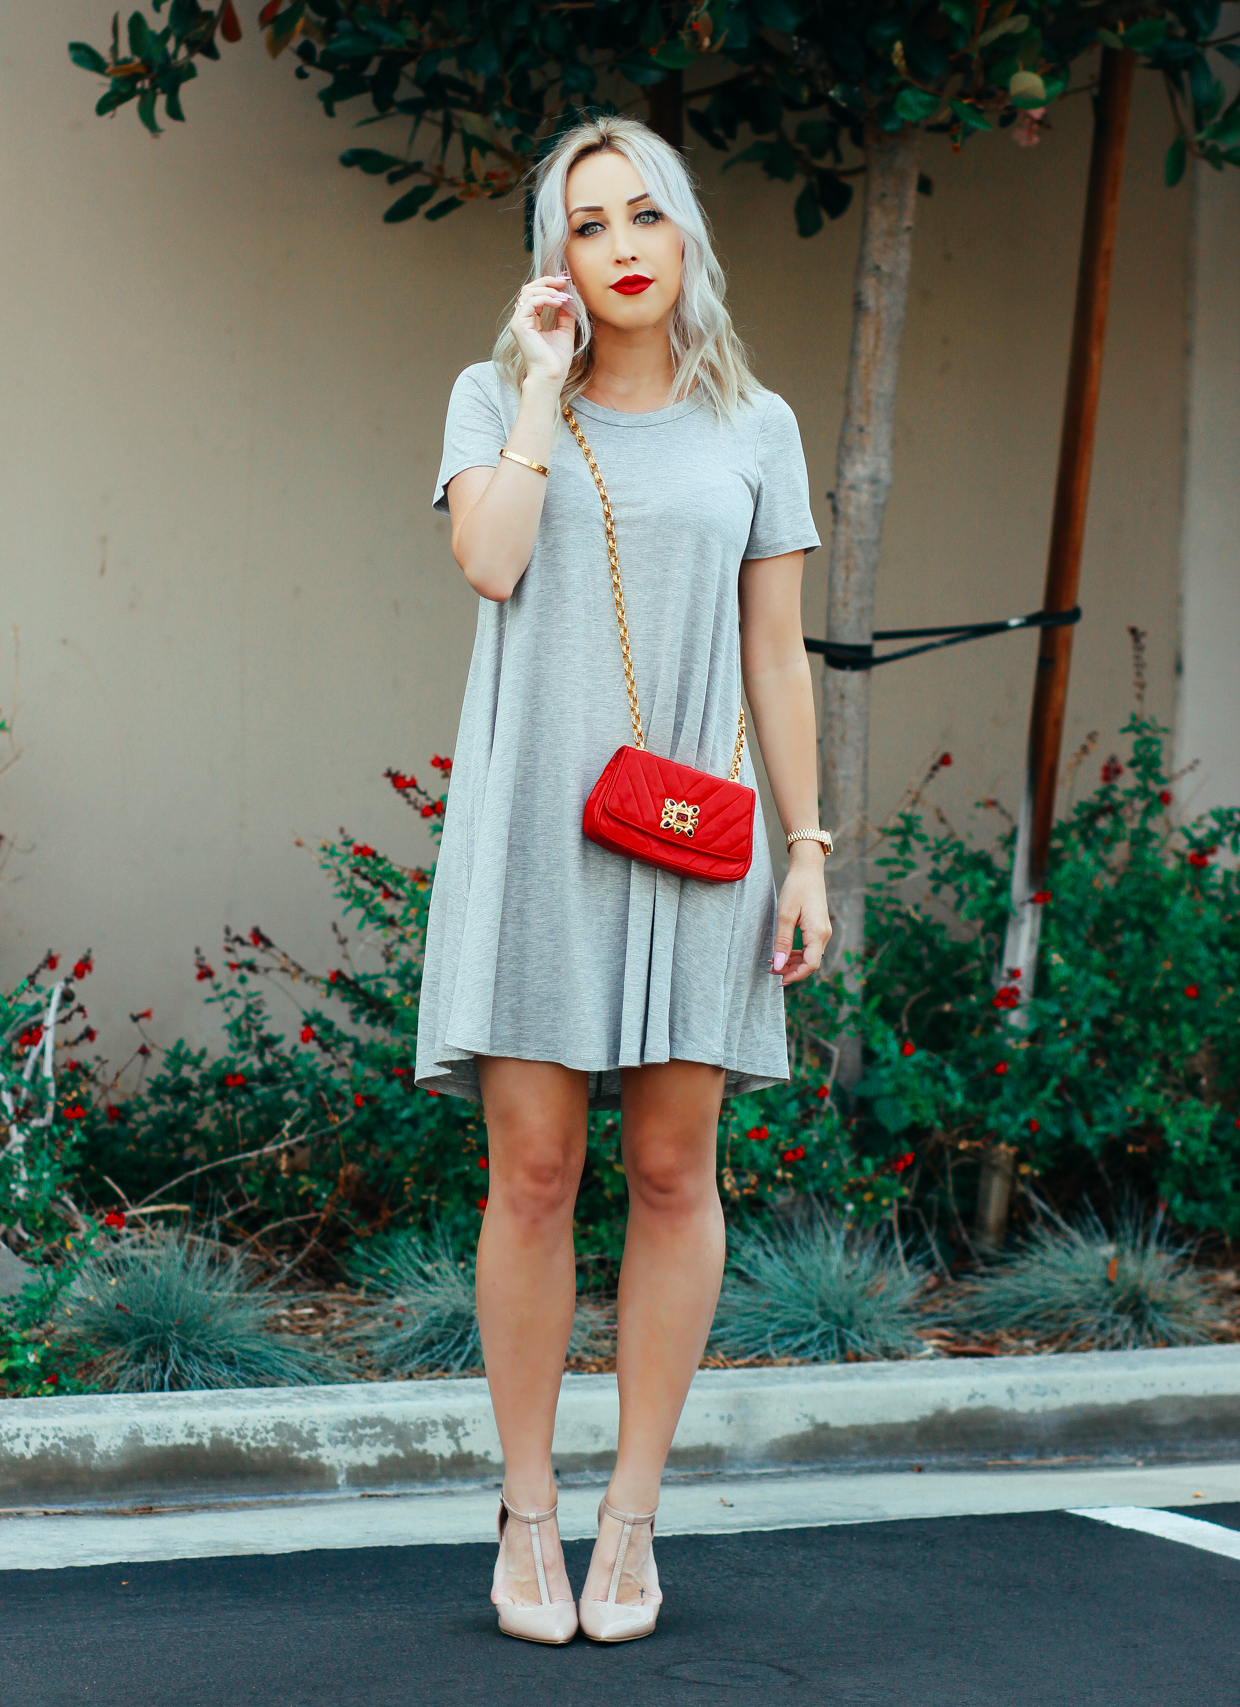 Blondie in the City | Simple Grey T-Shirt Dress from @anglclothing | Grey & Red #OOTD